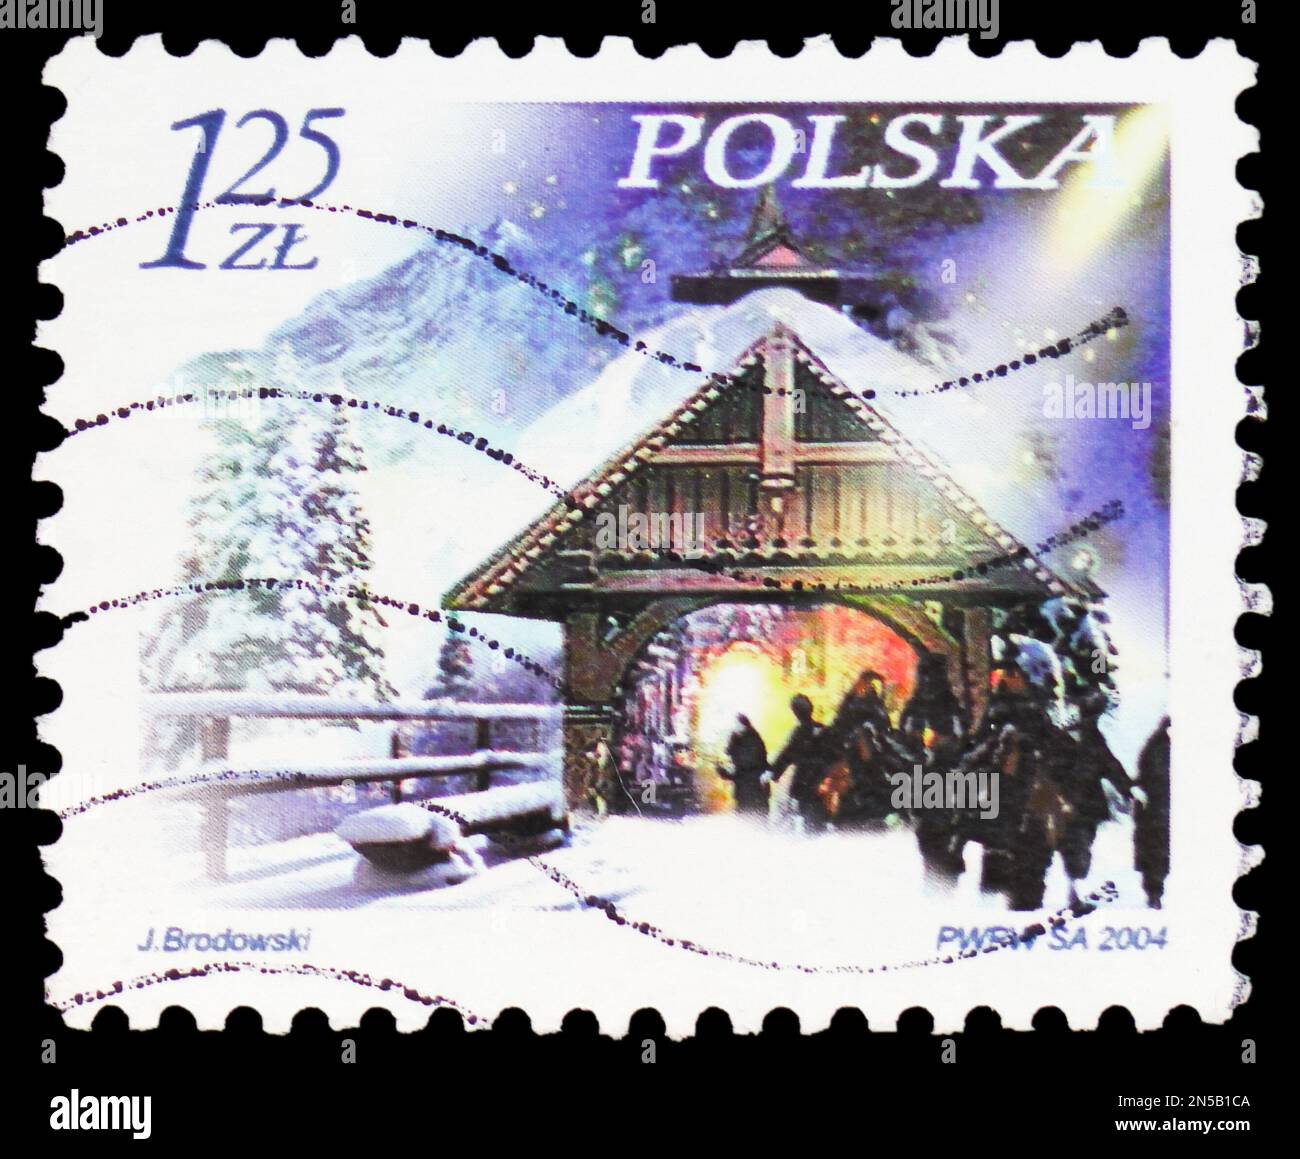 MOSCOW, RUSSIA - FEBRUARY 4, 2023: Postage stamp printed in Poland shows Worshippers at shrine, Christmas serie, circa 2004 Stock Photo